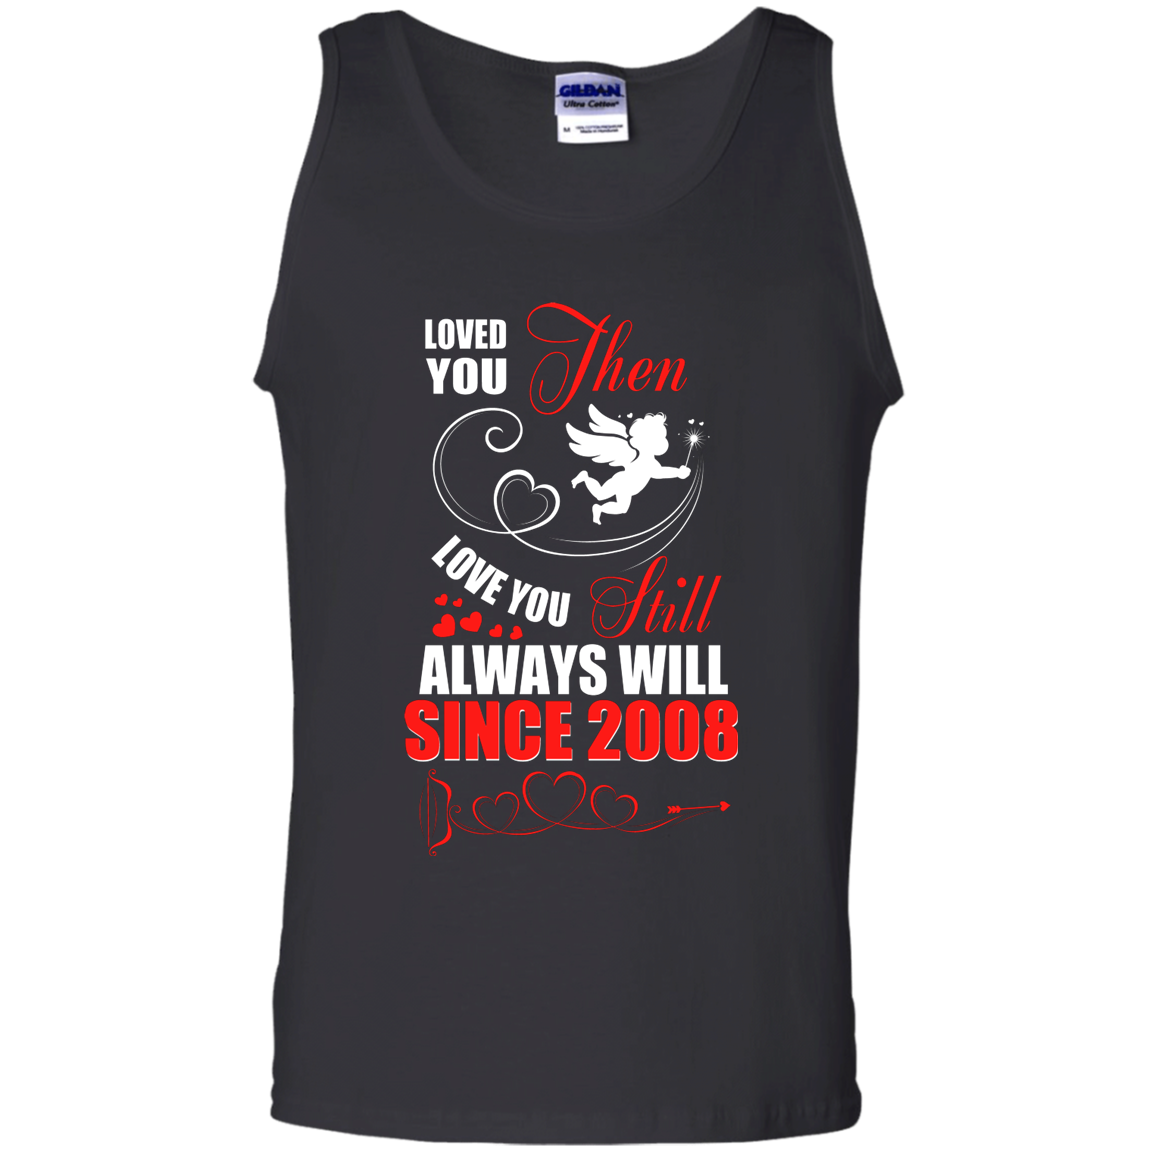 Check Out This Awesome Since 2008 Cute Wedding Anniversary Shirt For Couple Tank Top